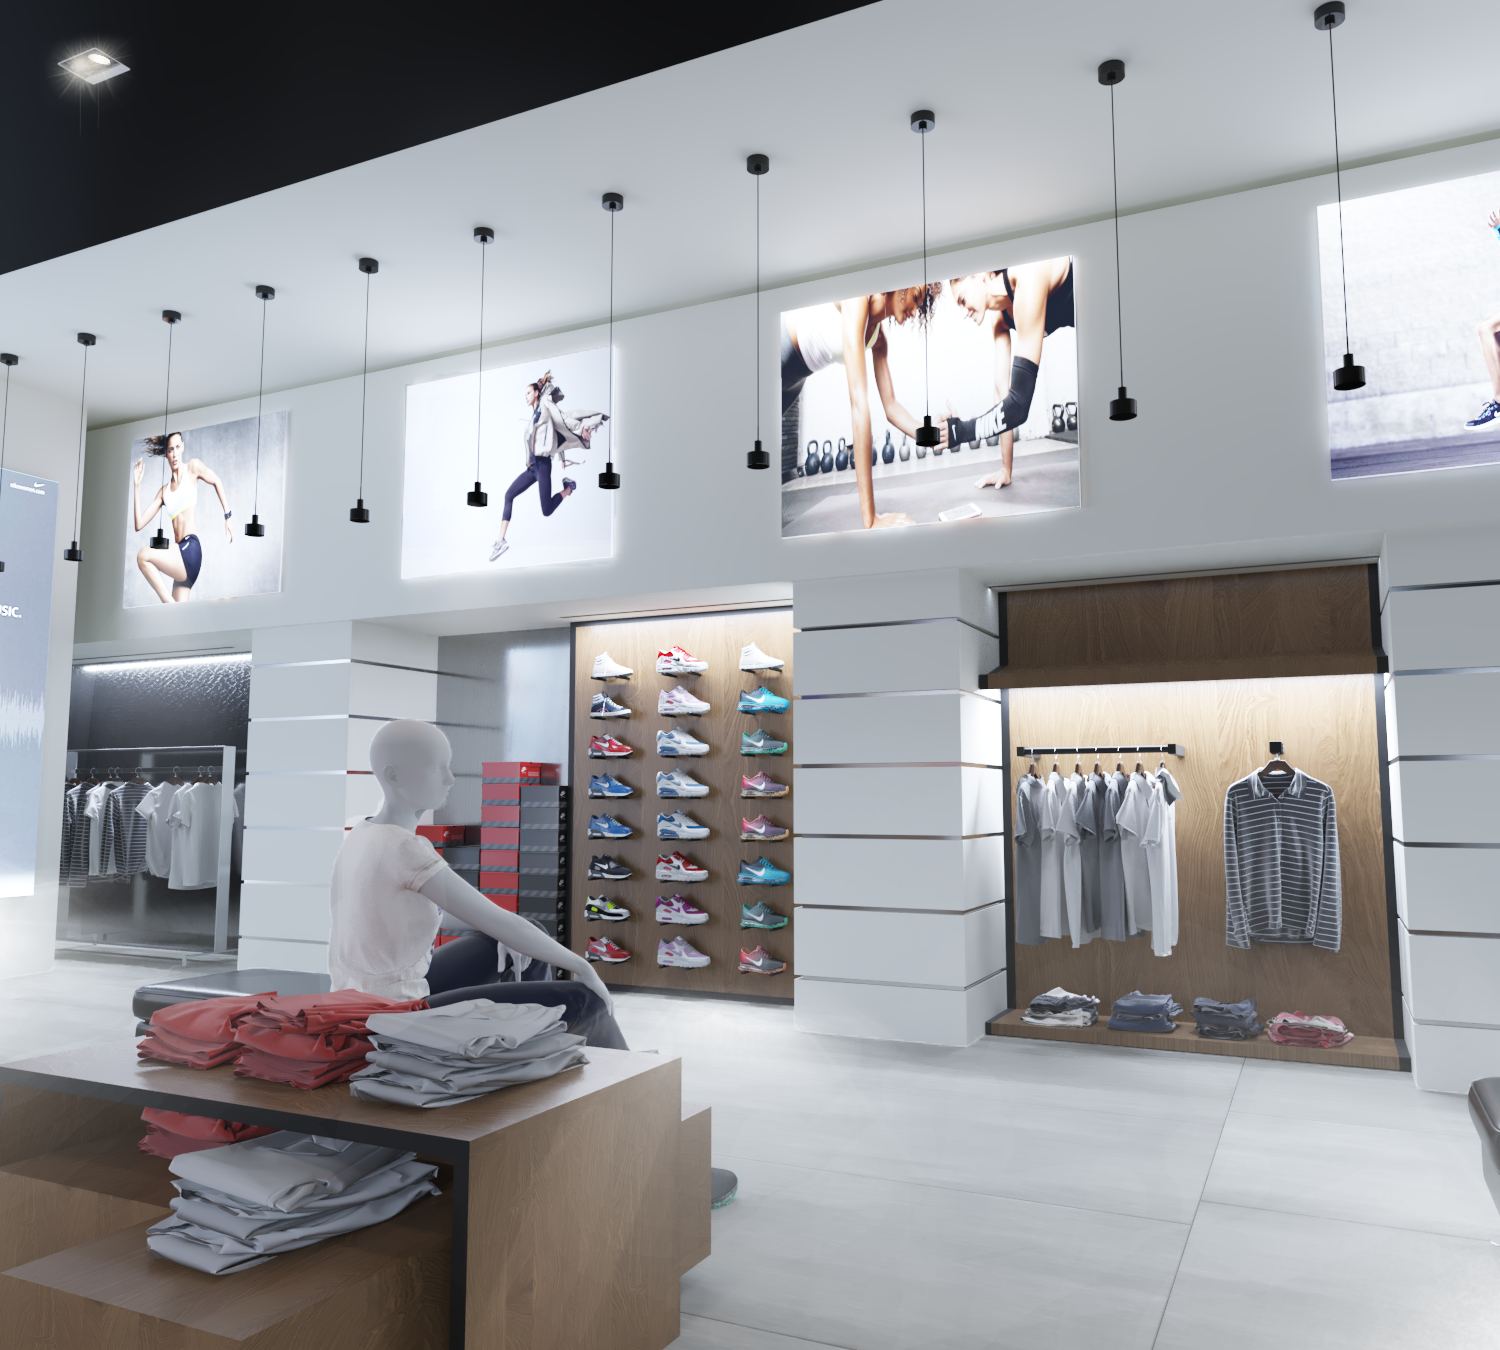 Design of the layout of shoes and clothes in the store